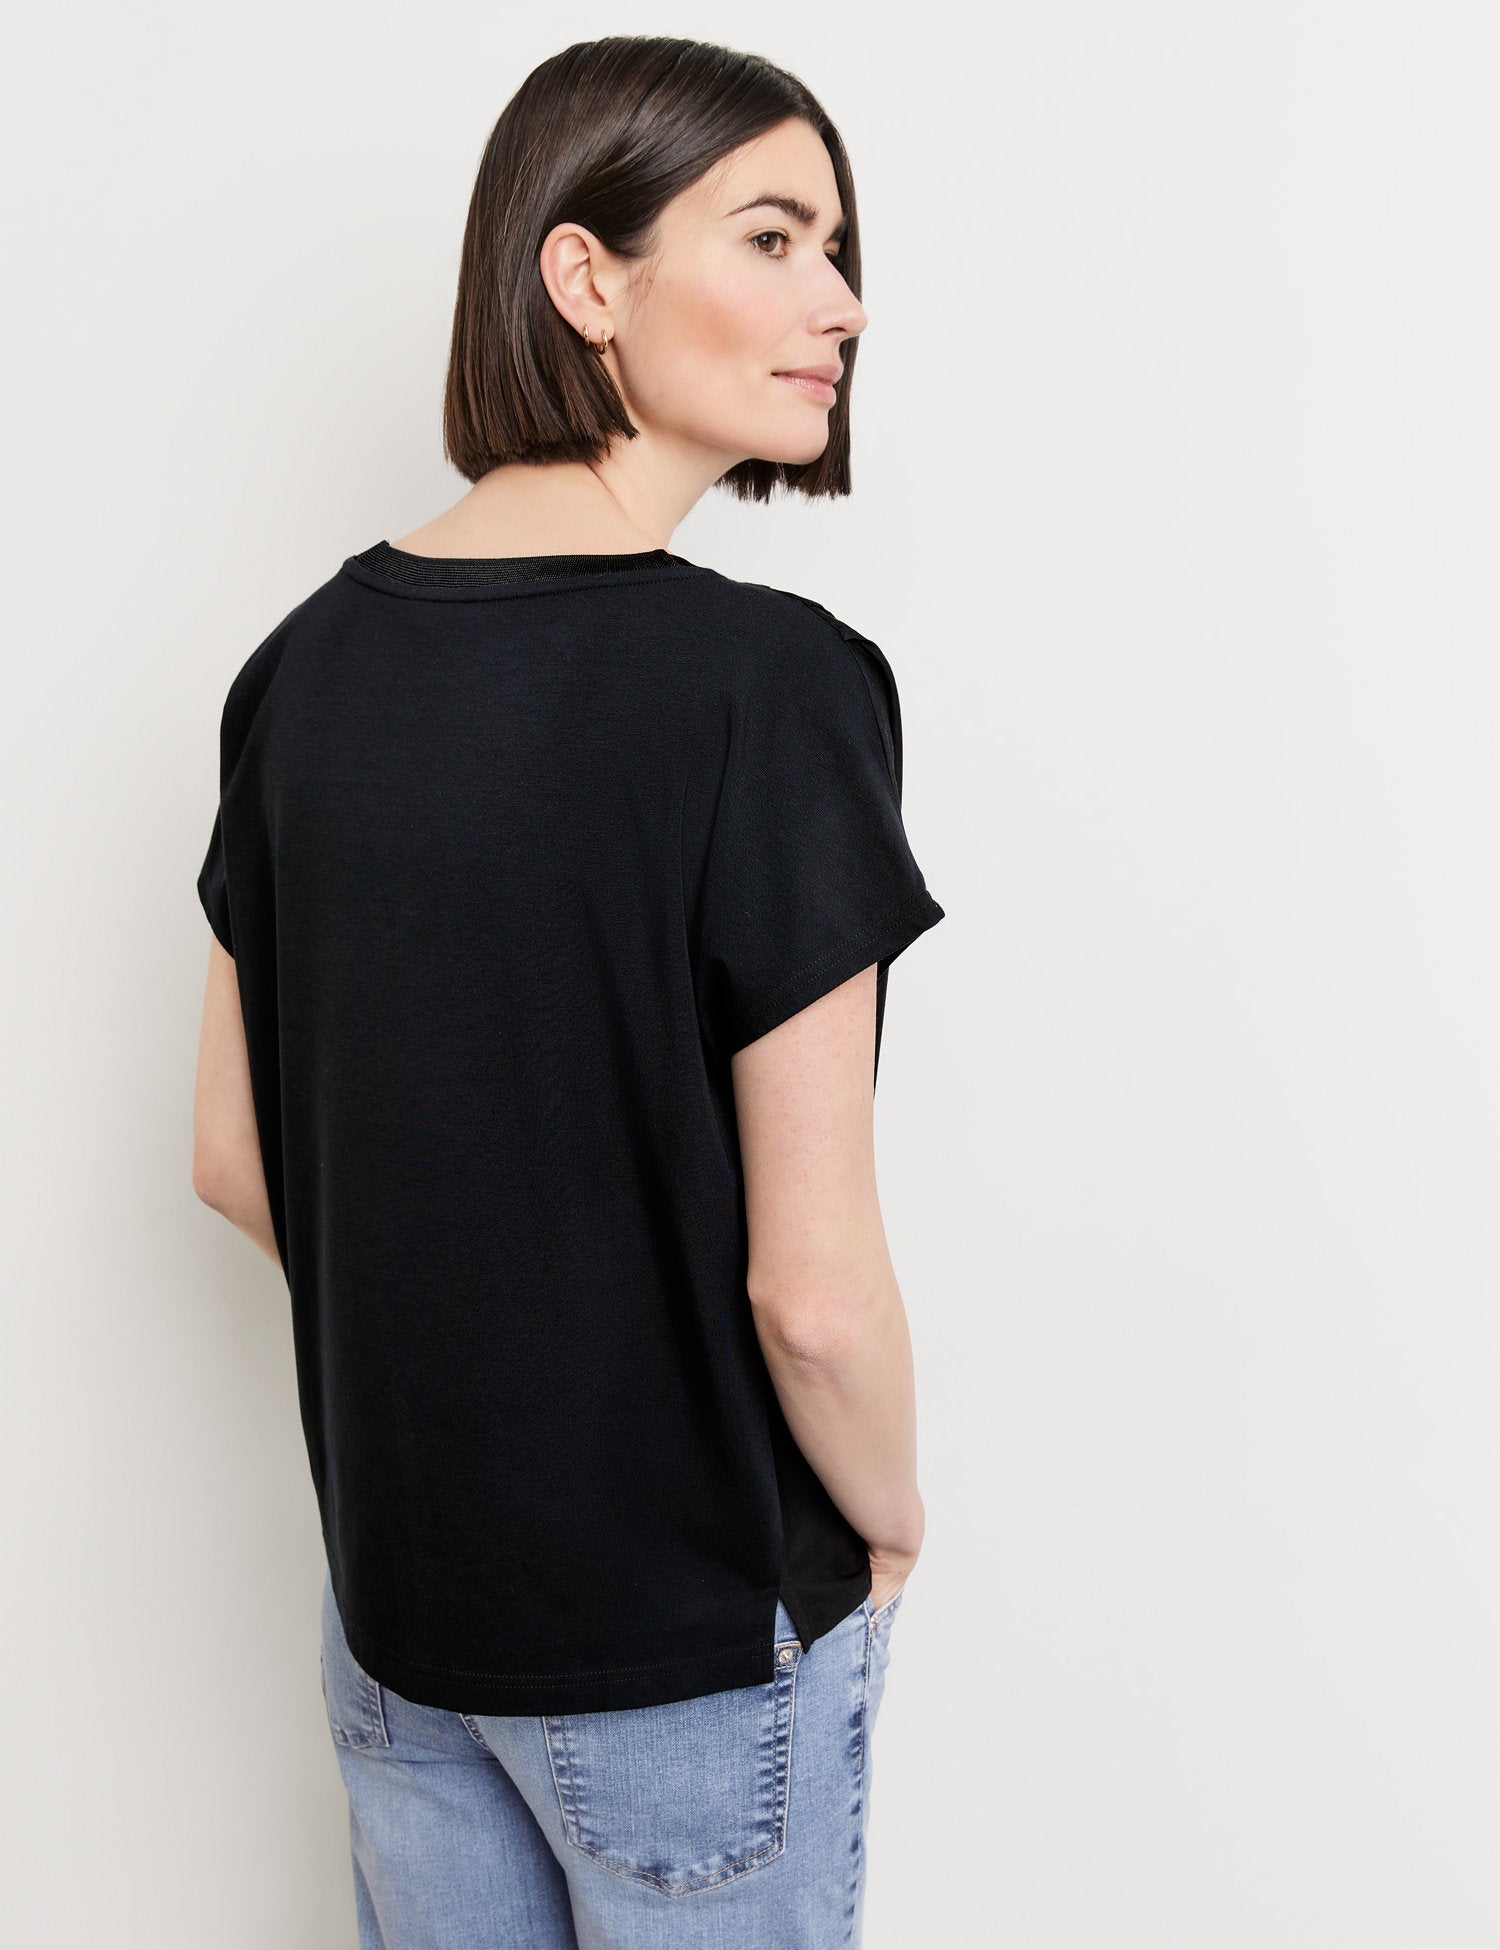 Short Sleeve Top With Fabric Panelling_370211-35019_8068_06